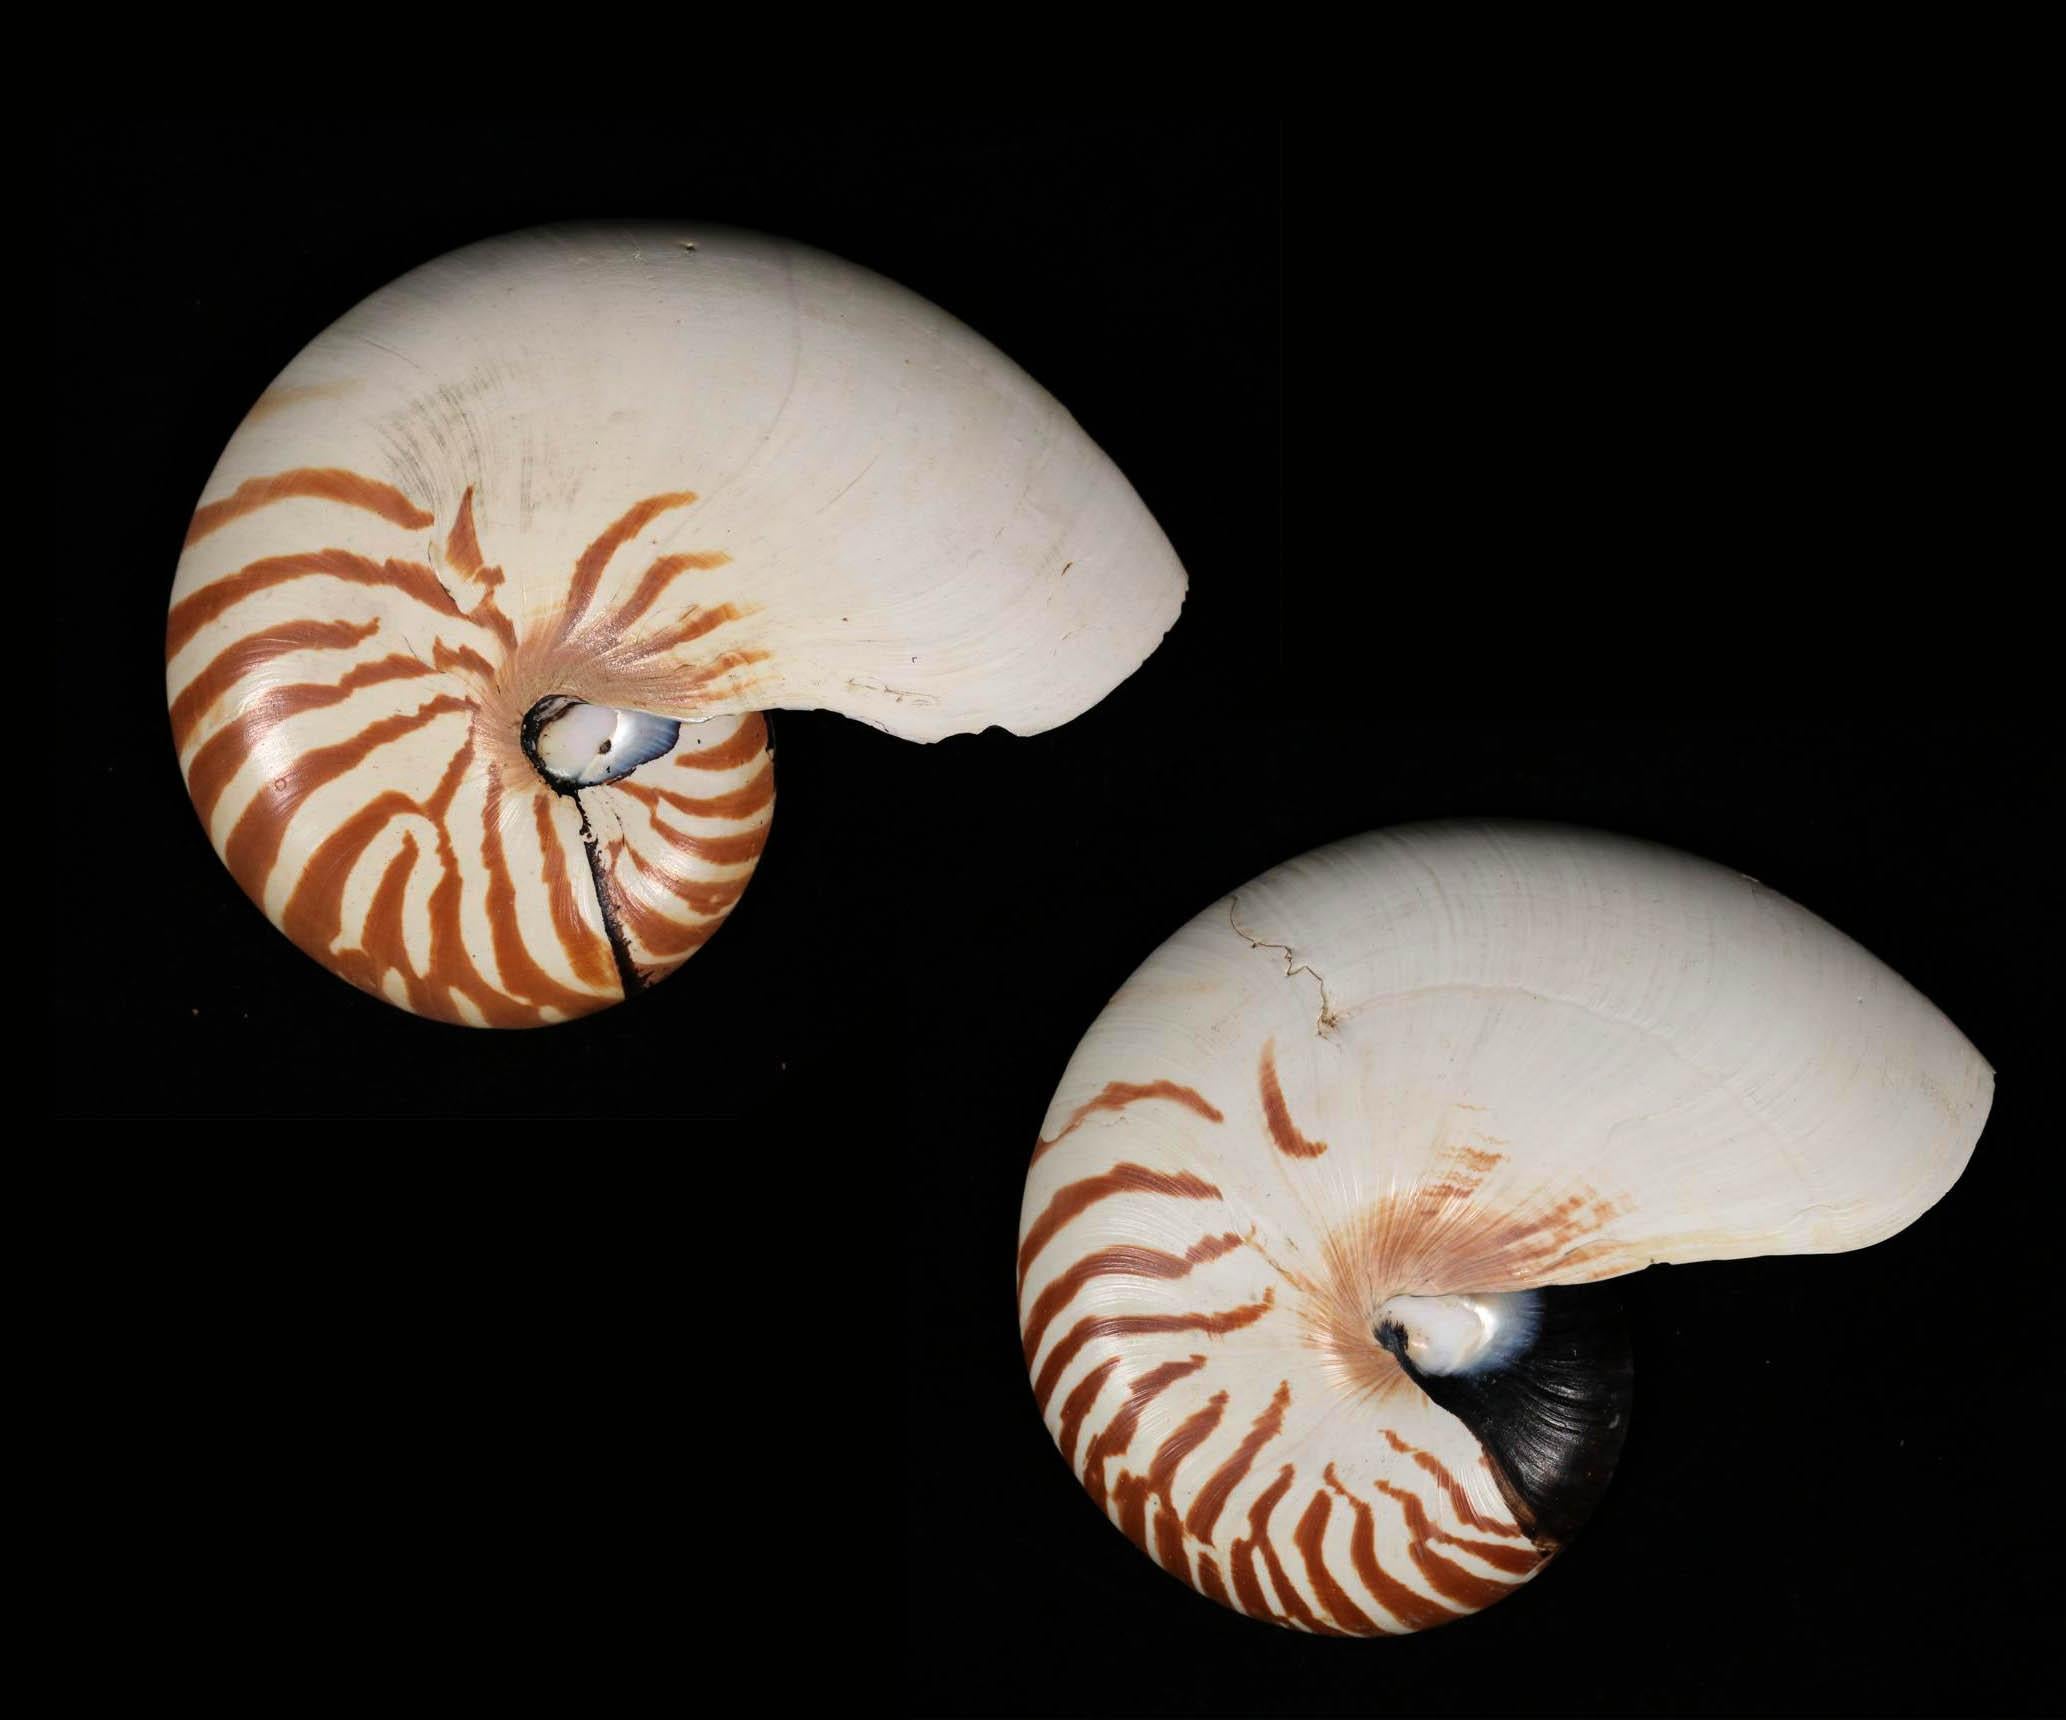 Pair of Natural Striped Chambered Nautilus Half Shells

Nautilus Pompulus
Philippines; harvested in the 20th century

Approximate size: 6.75 (w) x 5.5 (h) x 2.75 (d) in.

Nautilus shells have long been a staple of wonder for lovers of shells and as